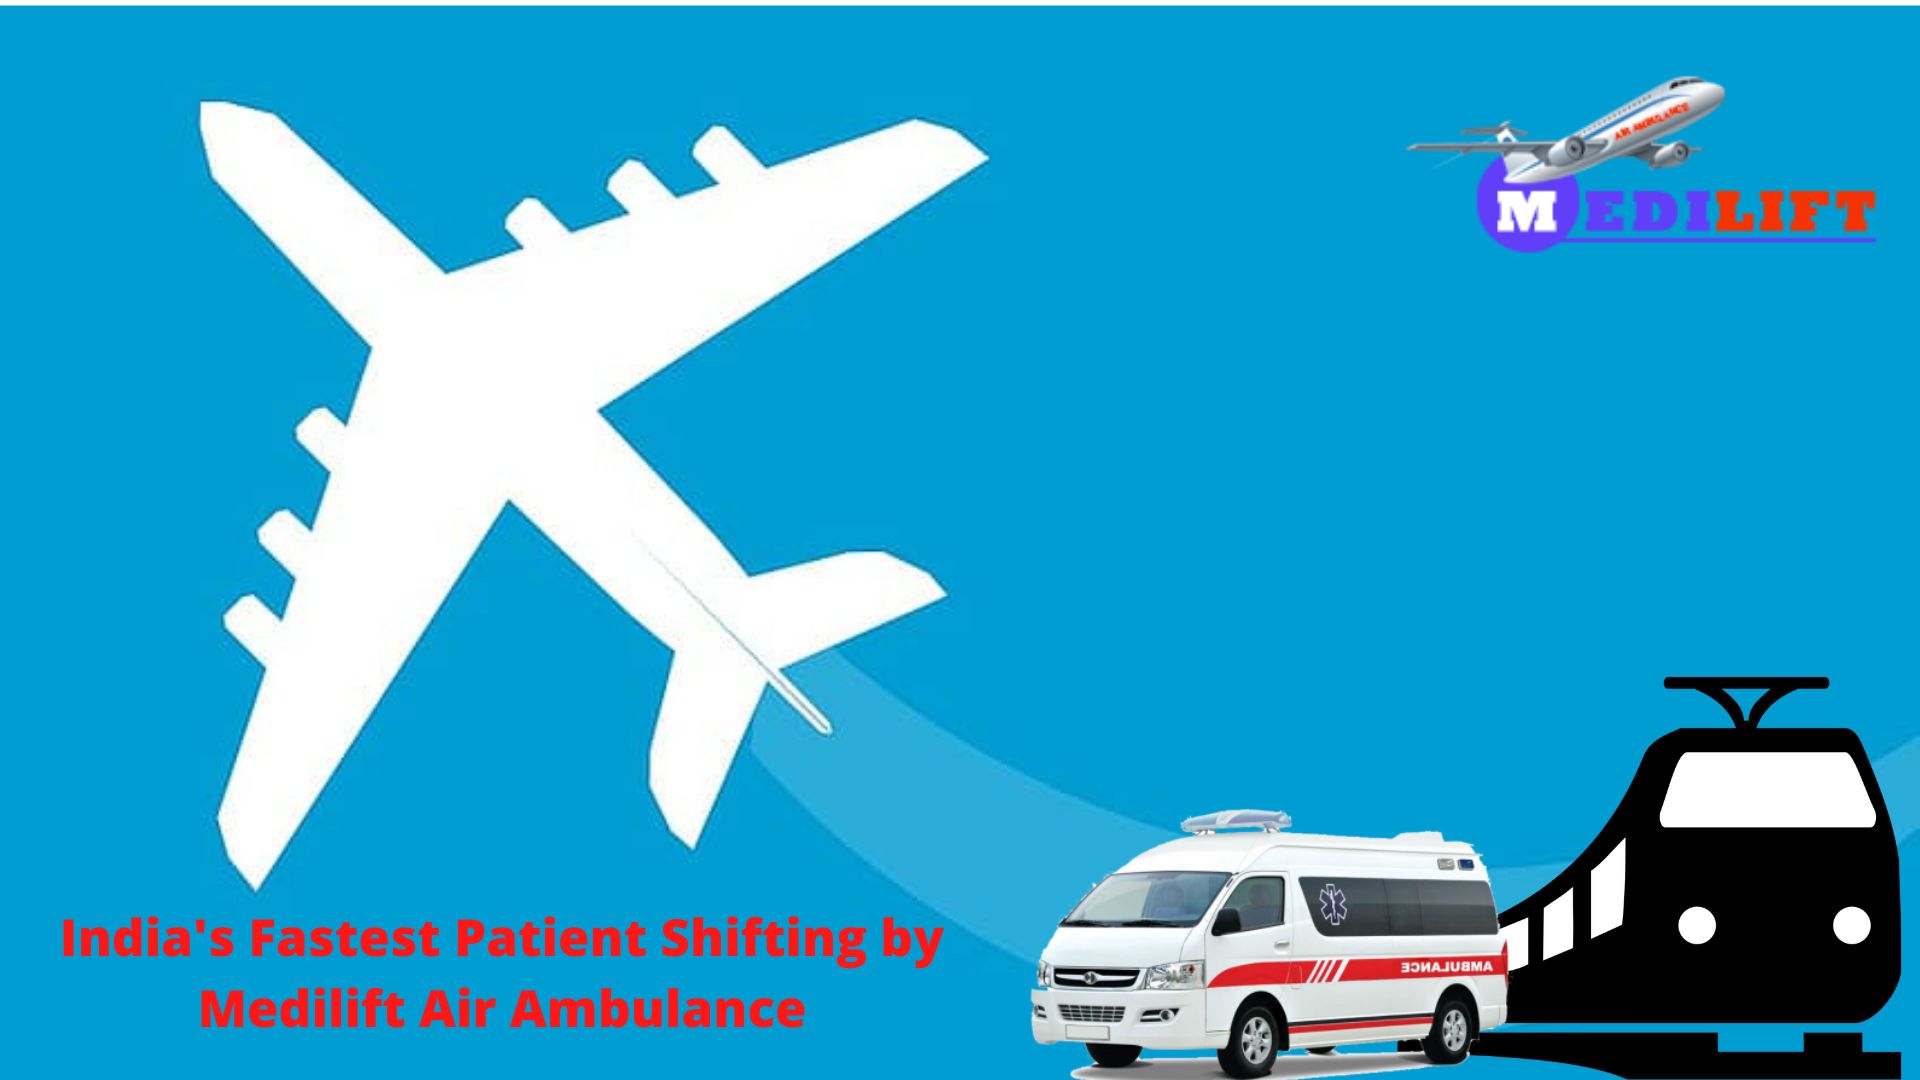 Book Air Ambulance Services in Guwahati with All Certified Medical Care by Medilift